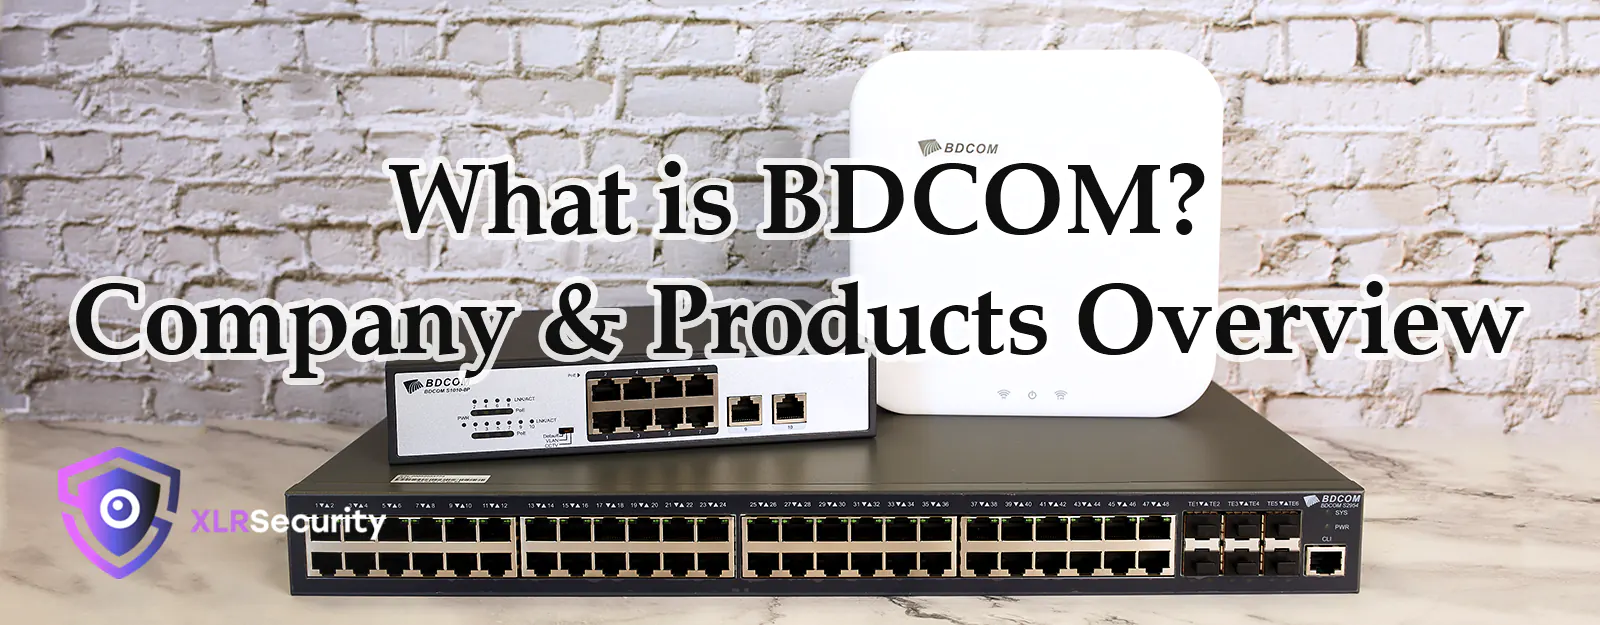 Banner - BDCOM company and products overview blog article